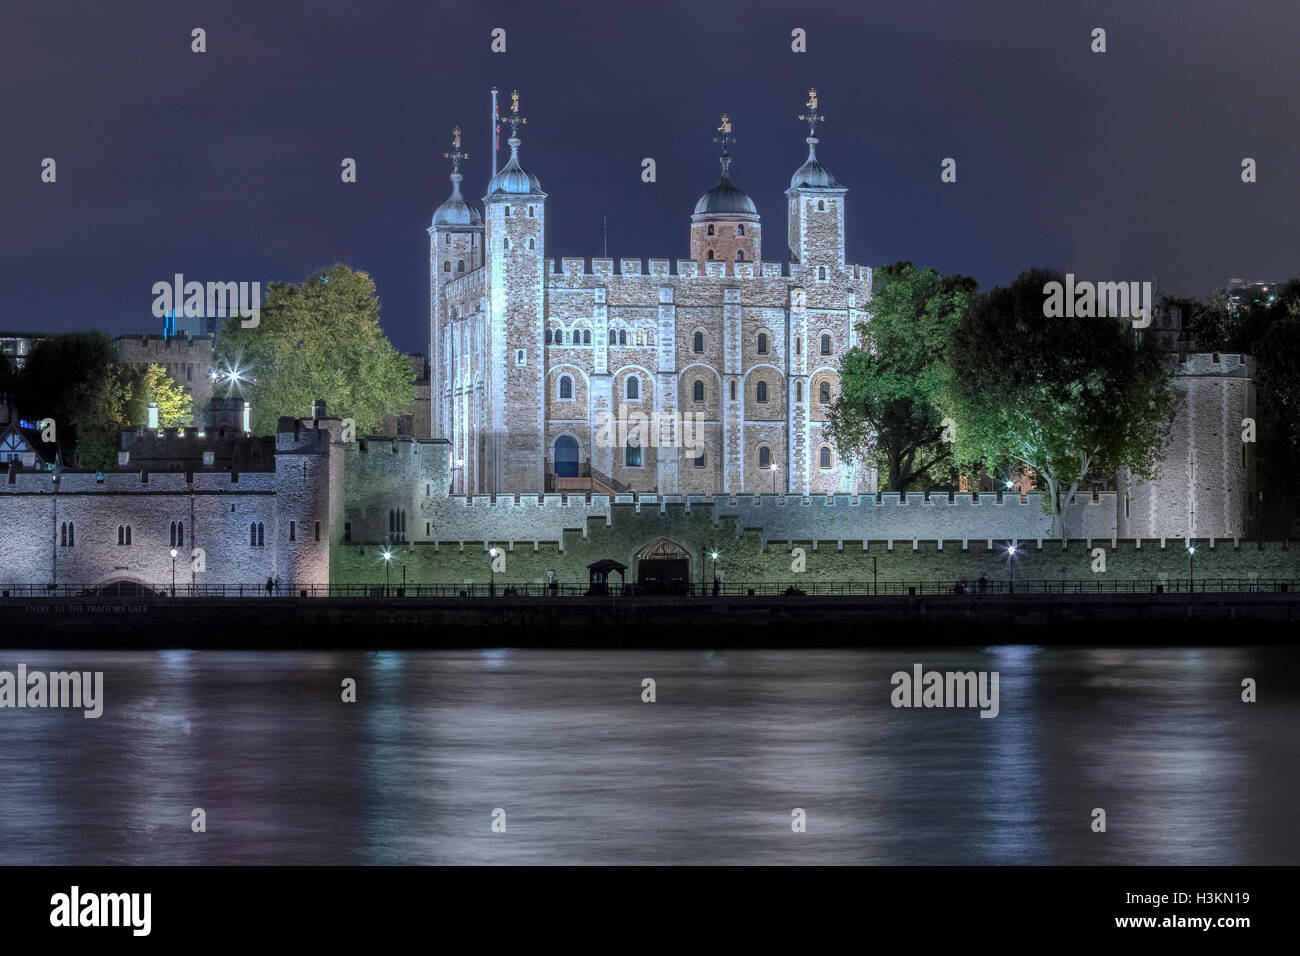 The Tower of London at night, England, UK Stock Photo